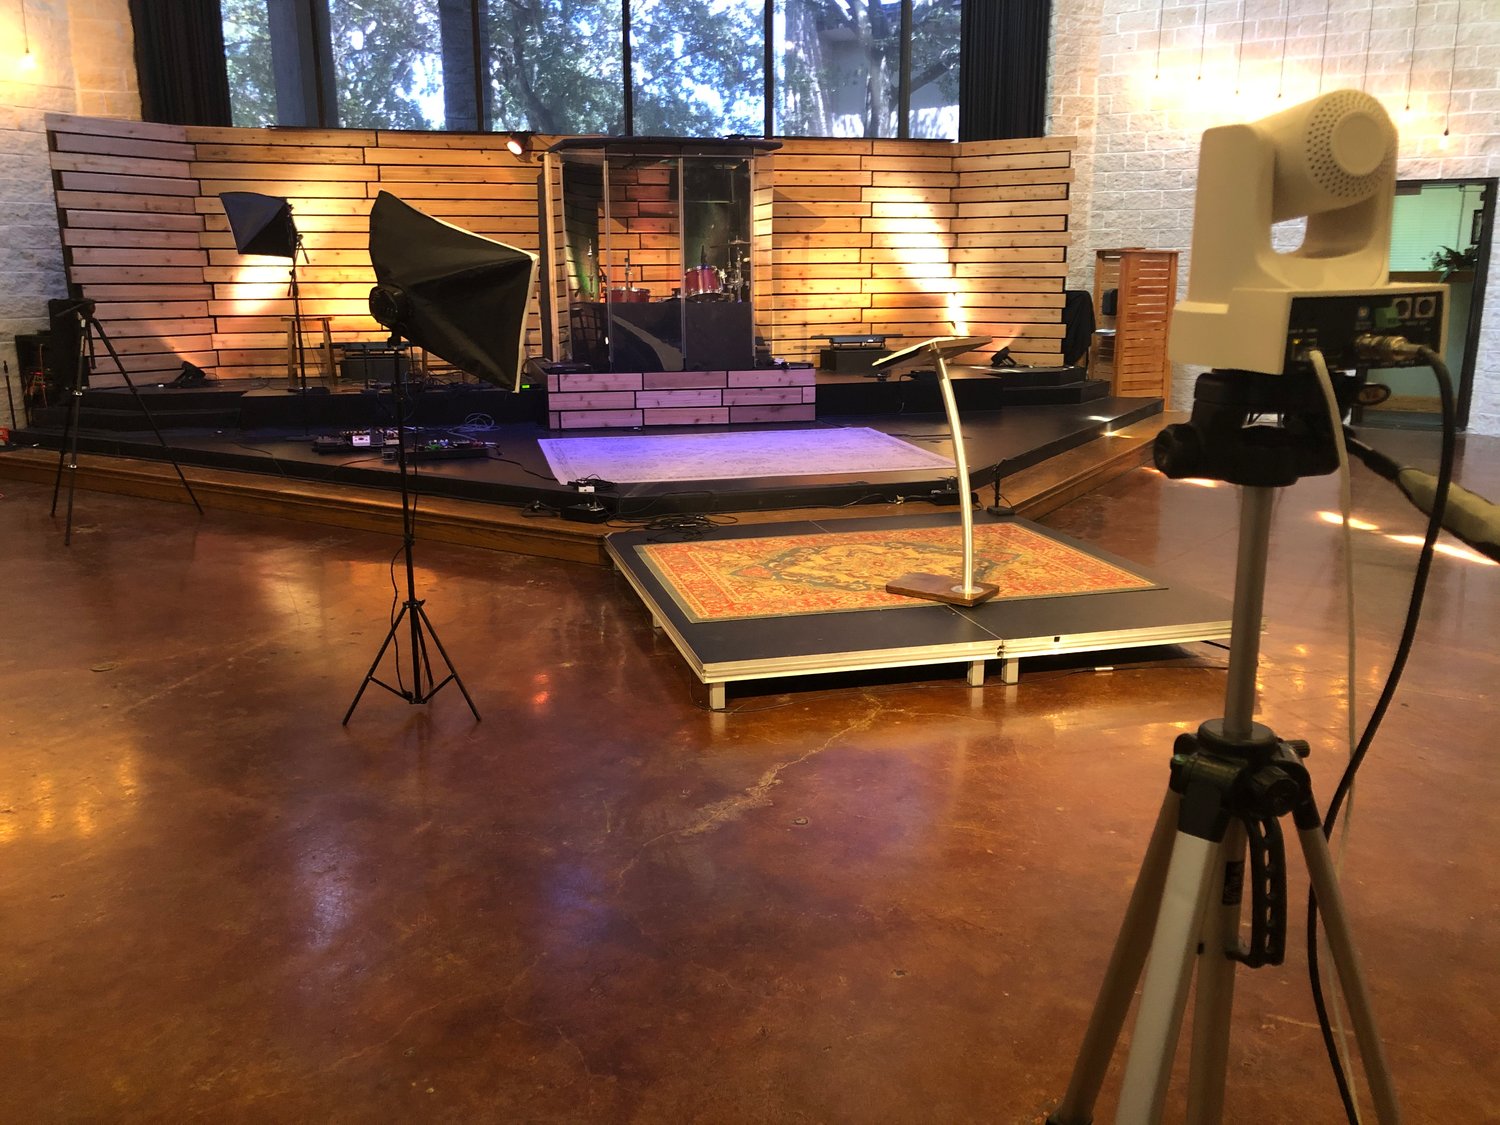 Lott Hall is prepared similar to a movie set to broadcast the Contemporary worship service for St. Peter’s United Methodist Church in Katy.